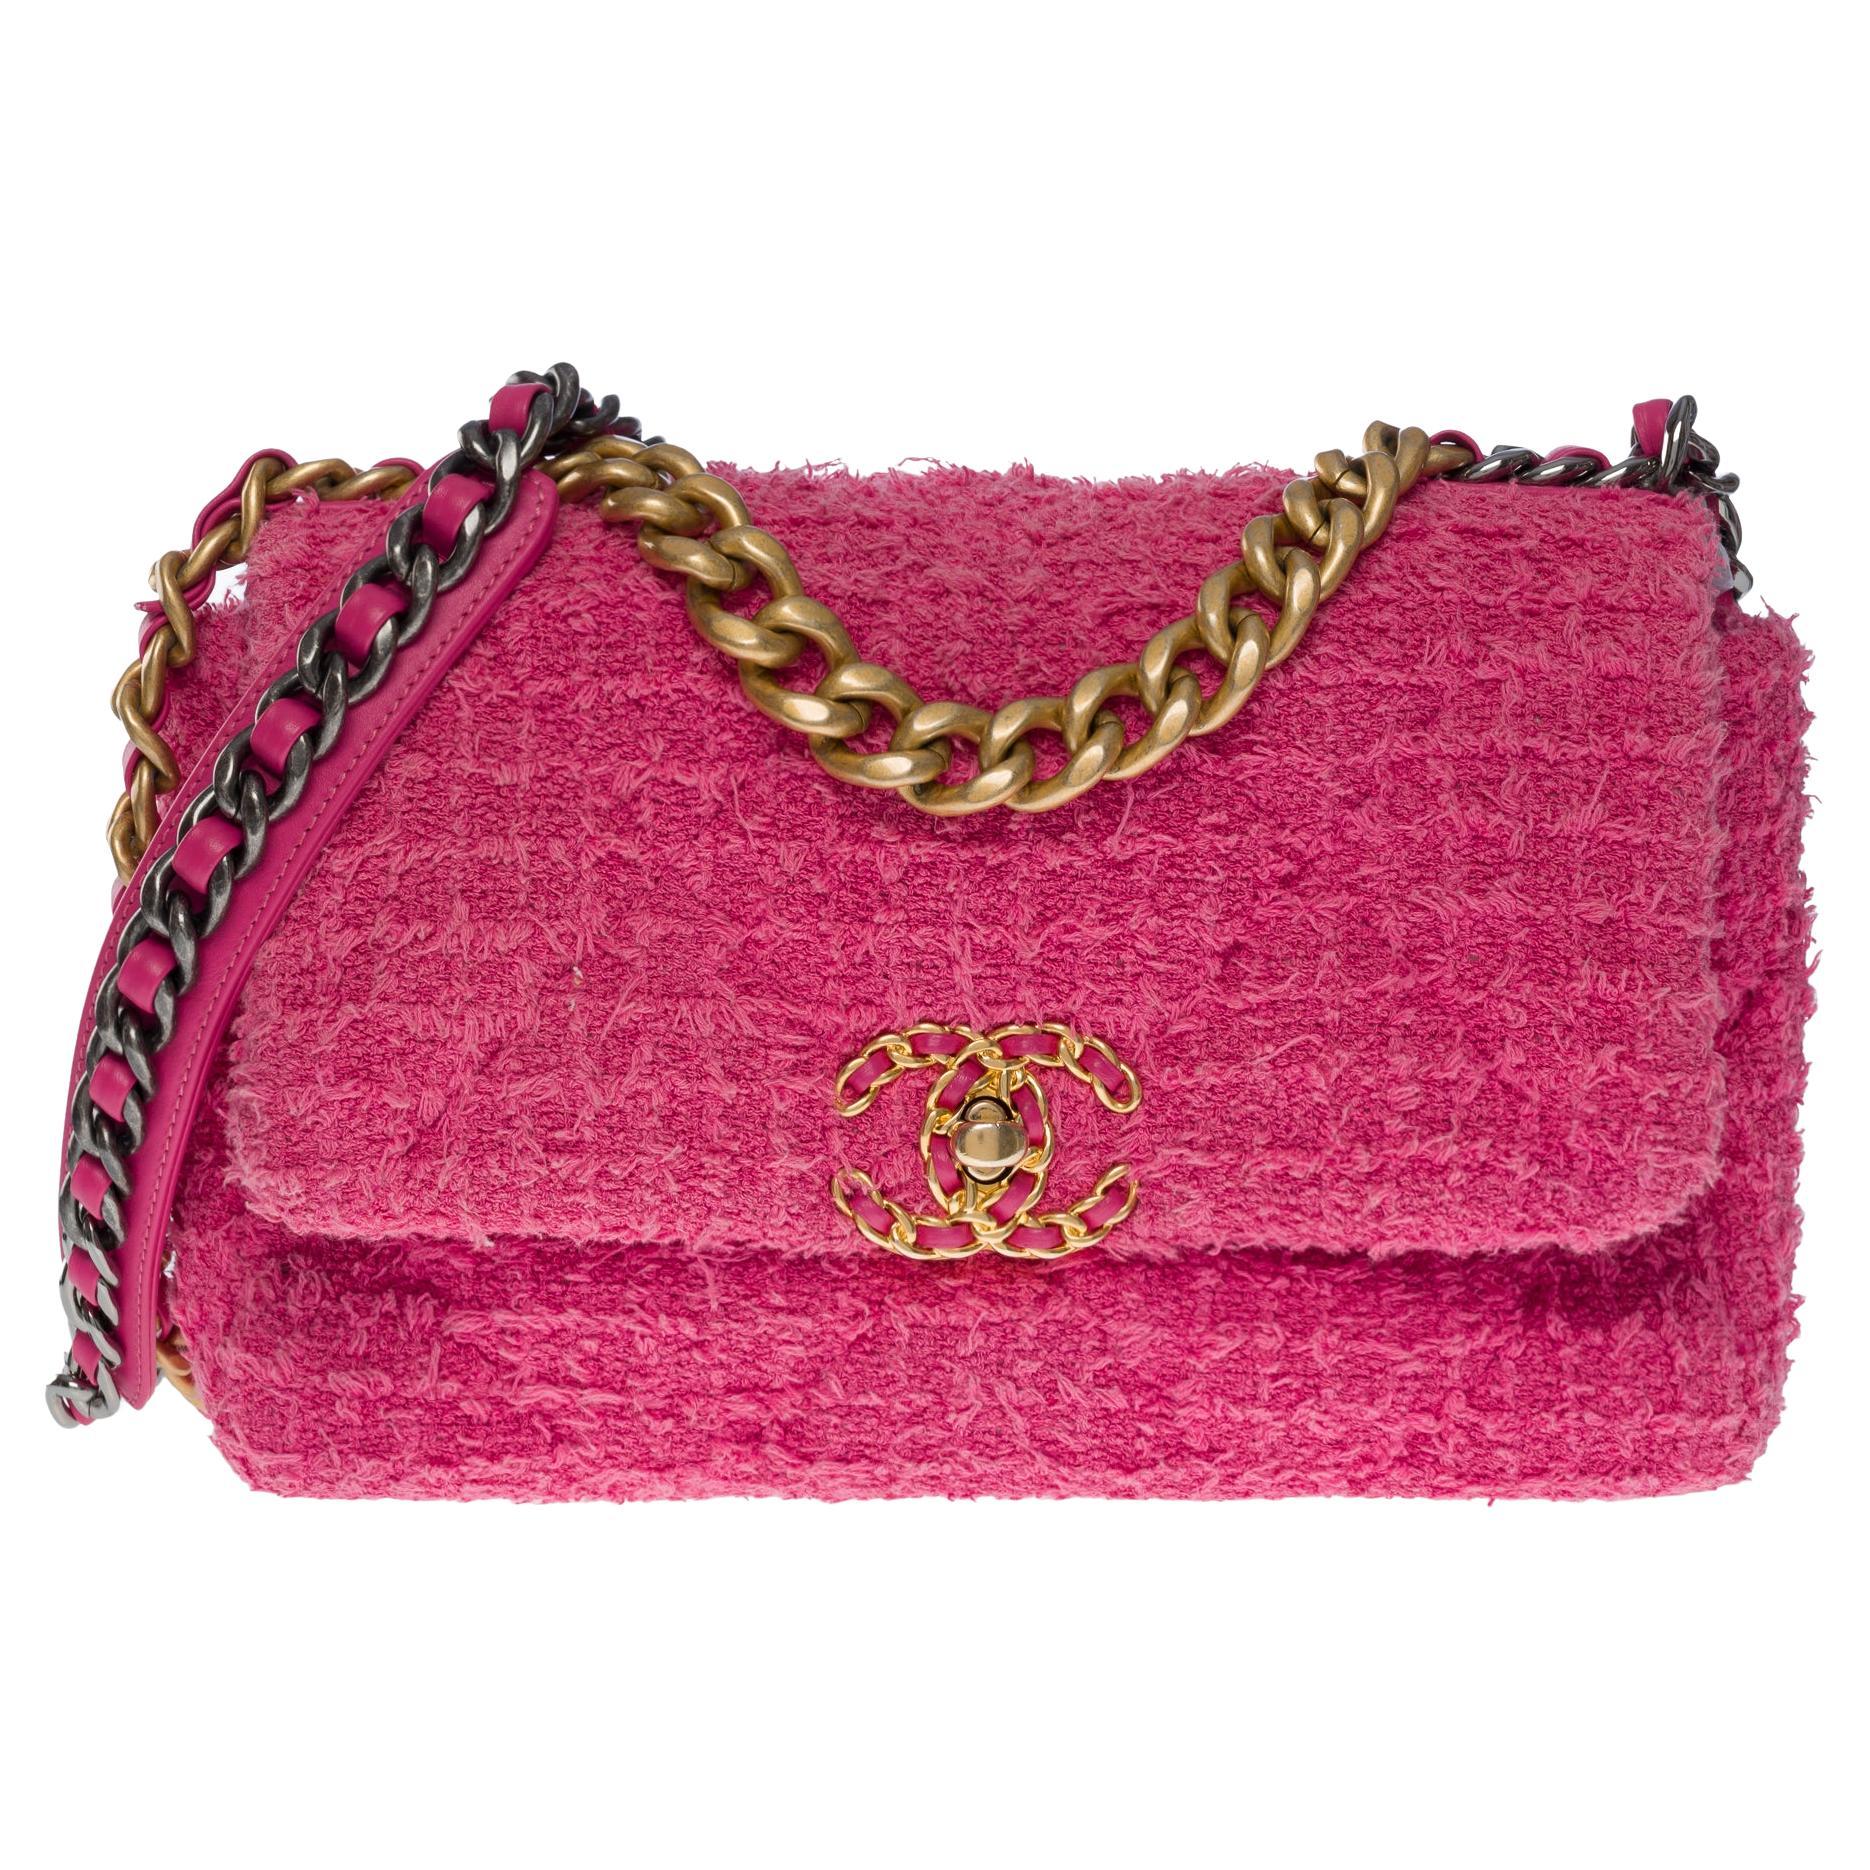 Lovely Chanel 19 shoulder bag in pink quilted cotton canvas , Matt